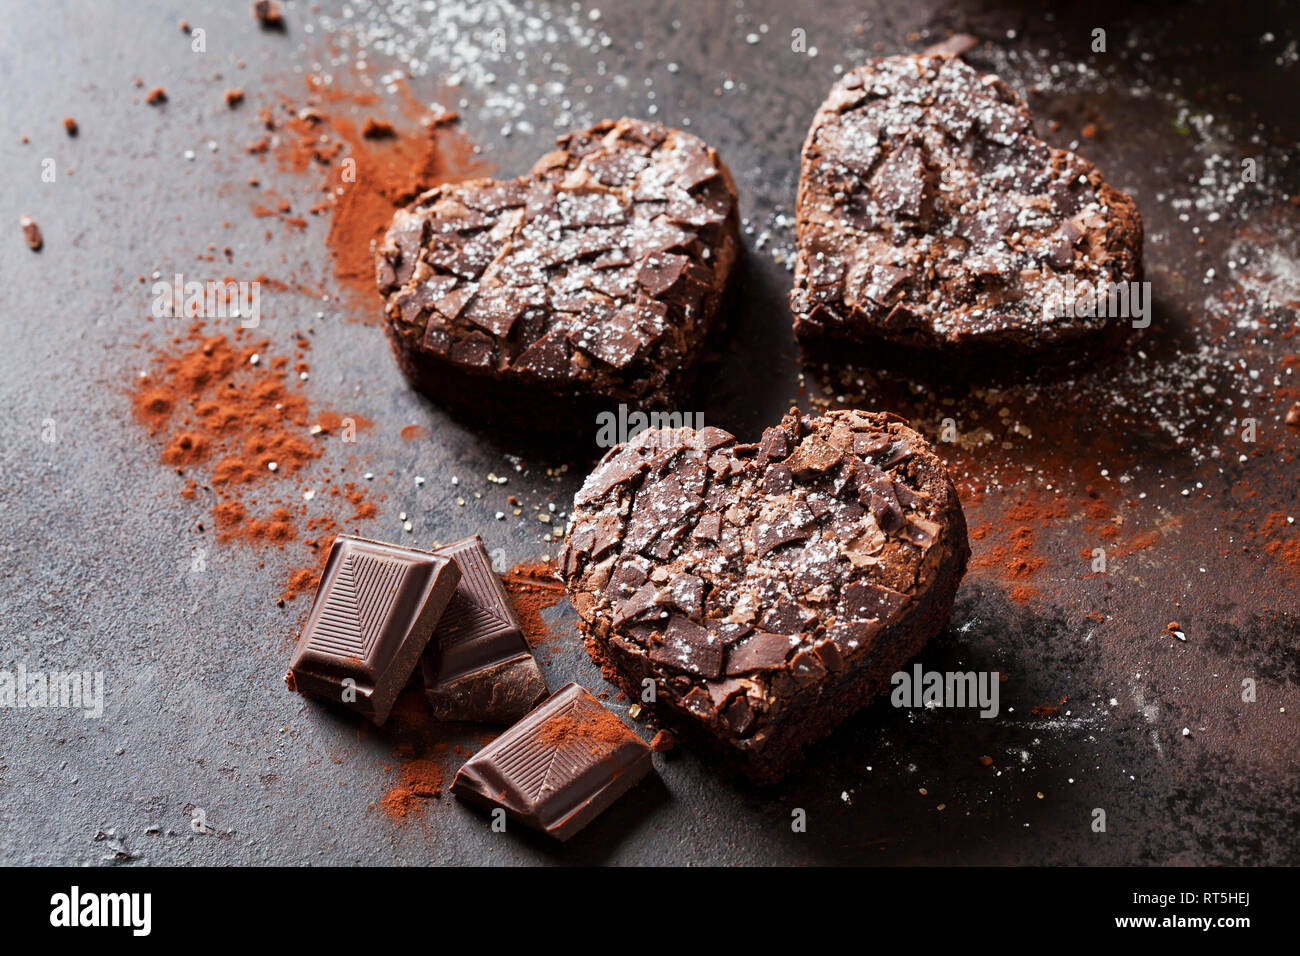 Three heart-shaped brownies and chocolate on metal Stock Photo